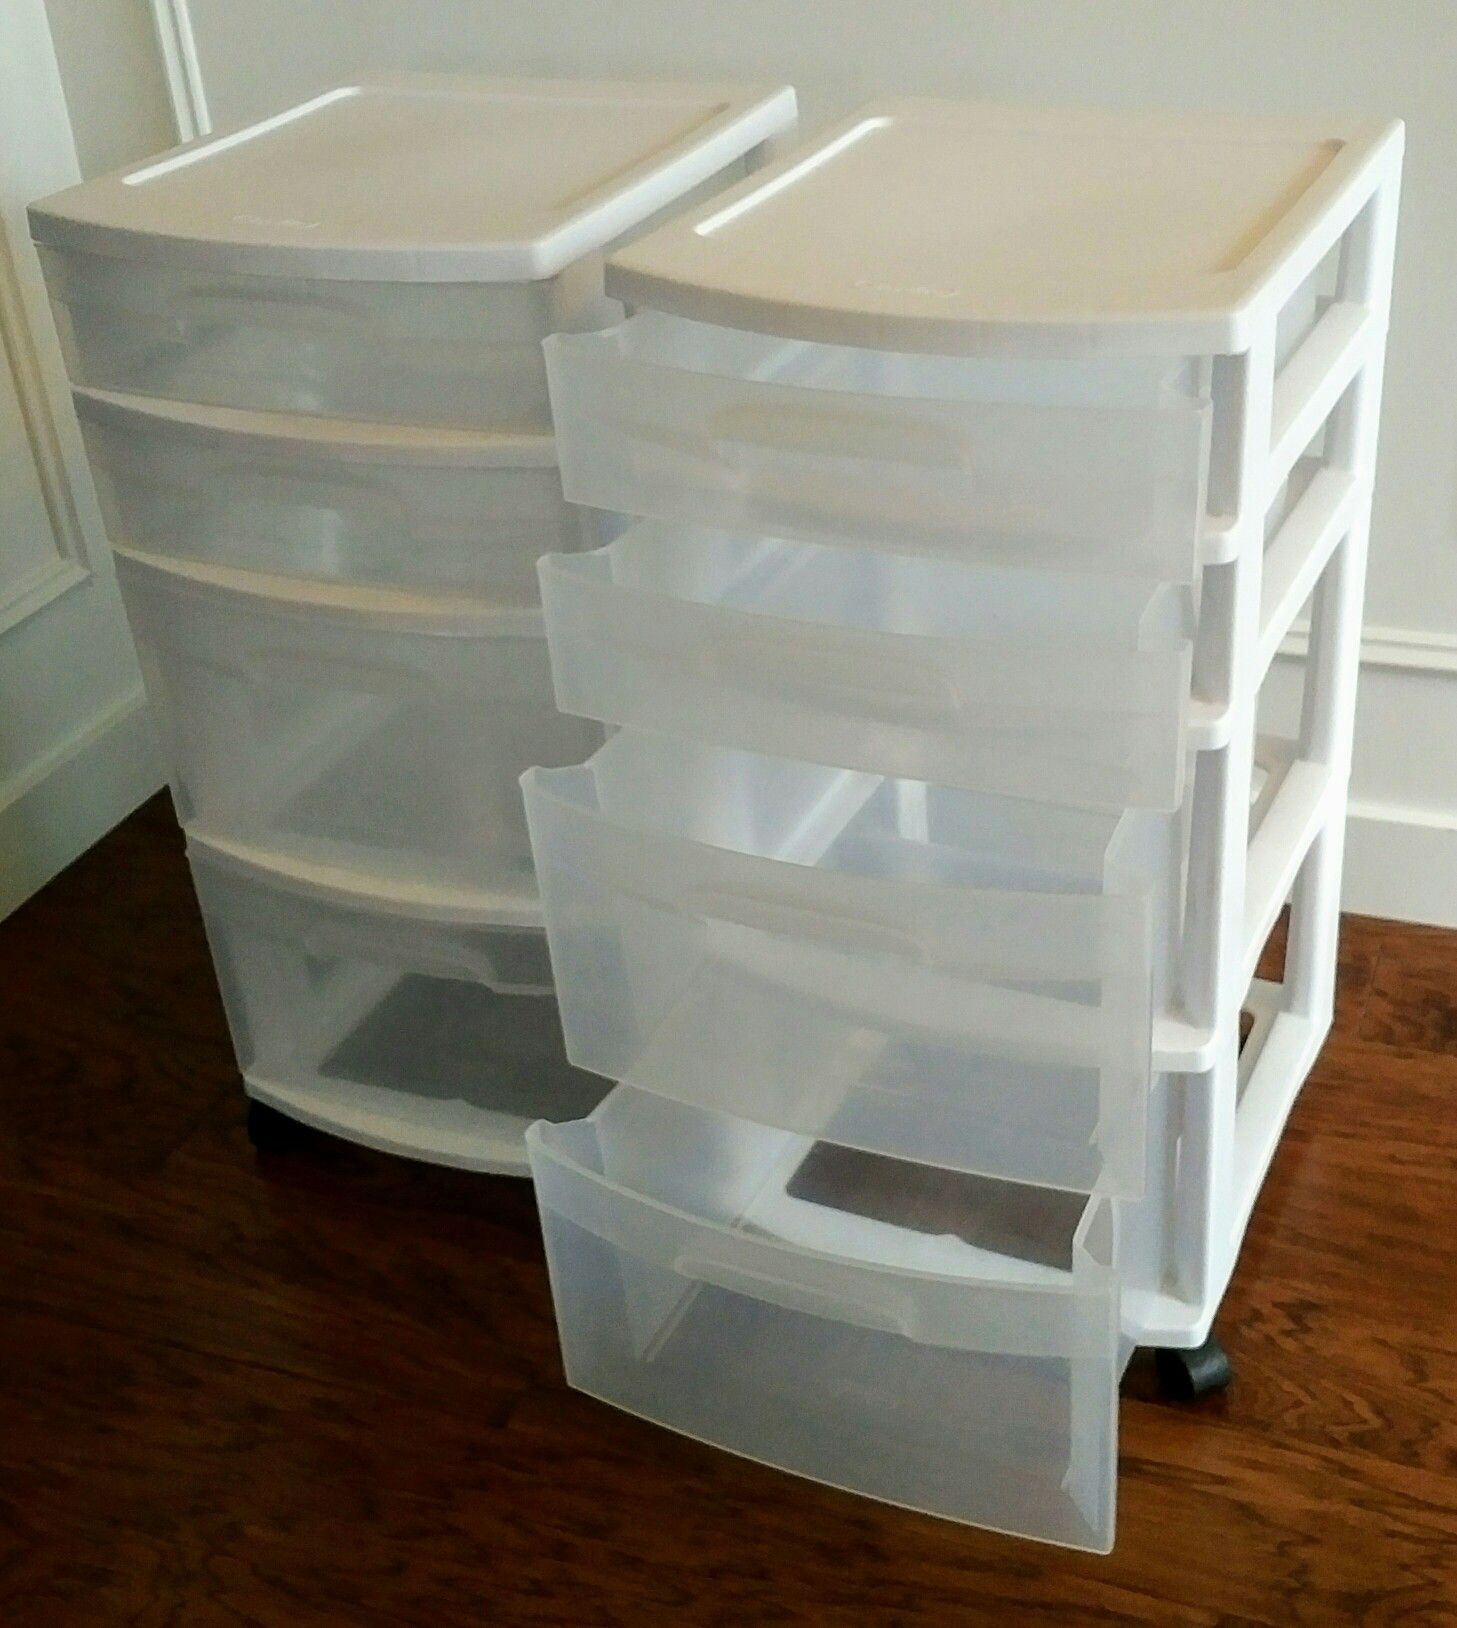 Set of TWO Sterilite 4-drawer Plastic Storage Cases with caster wheels